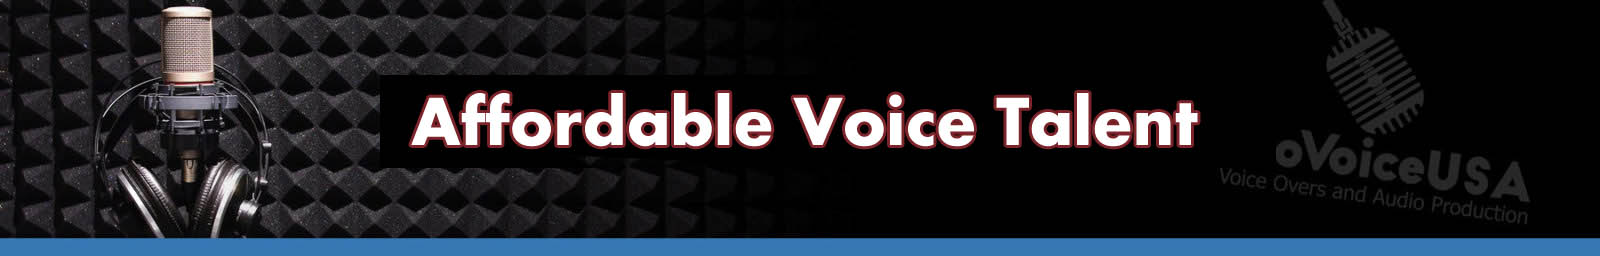 Affordable Voice Talent | American Voice Recording Service | ProVoice USA